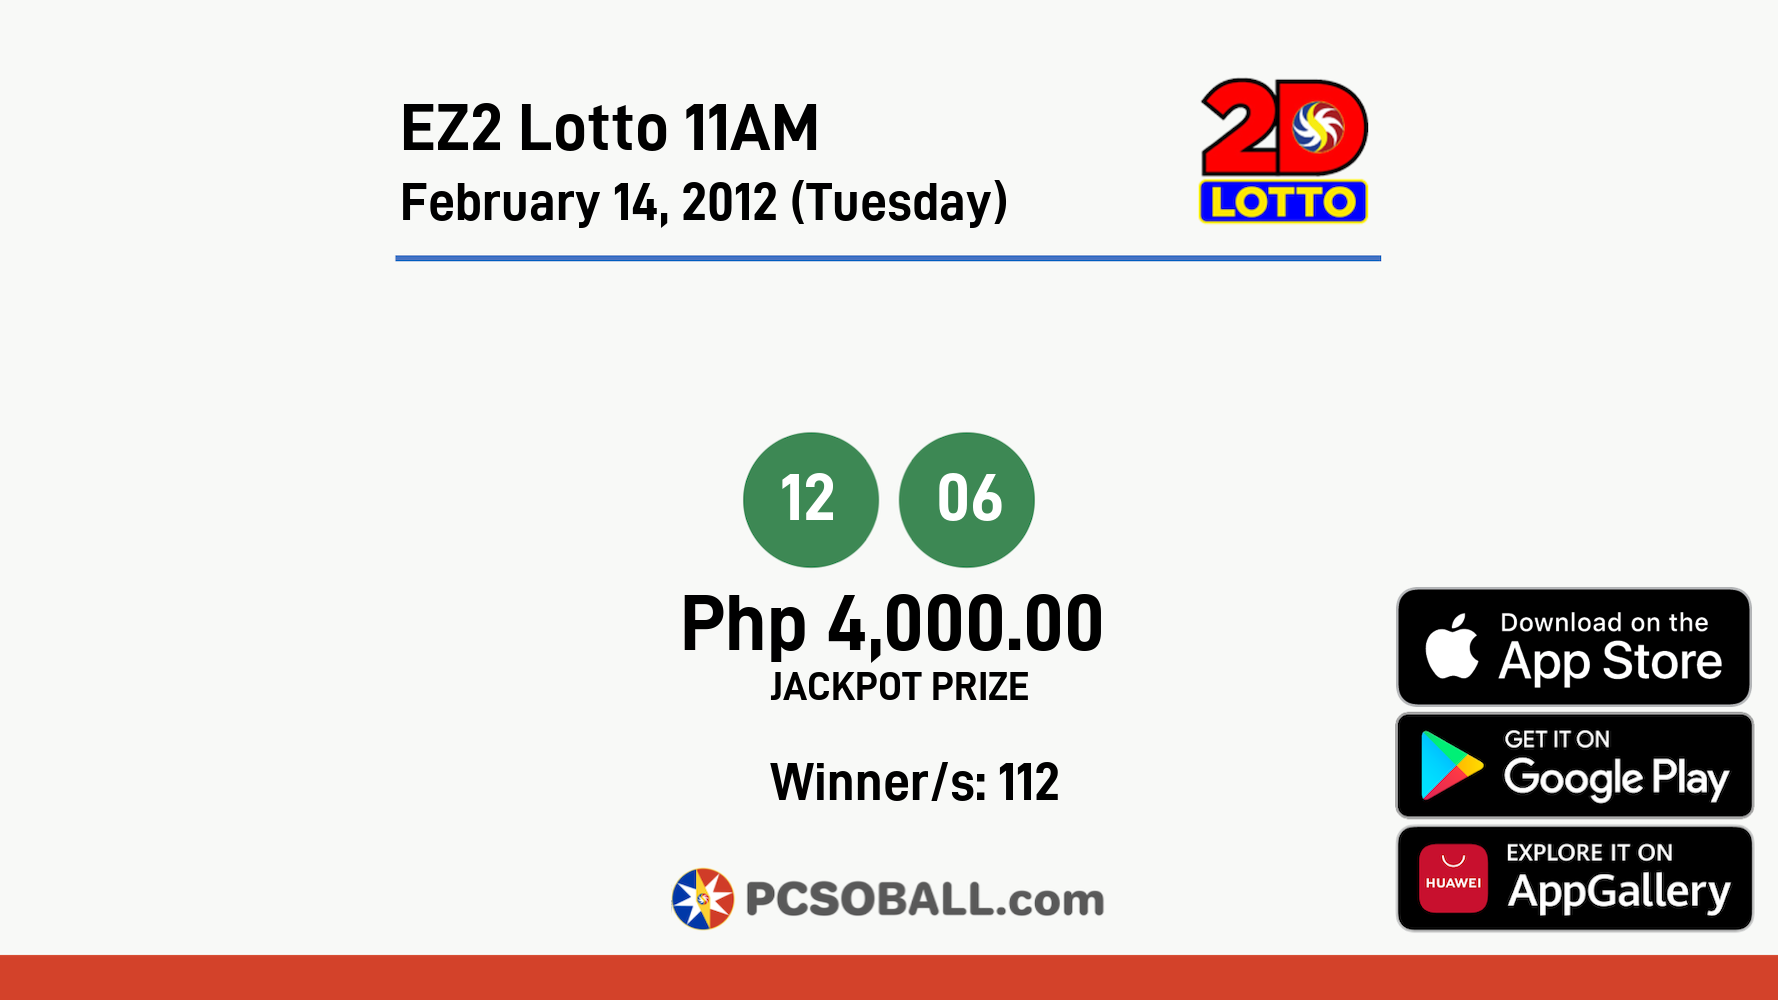 EZ2 Lotto 11AM February 14, 2012 (Tuesday) Result